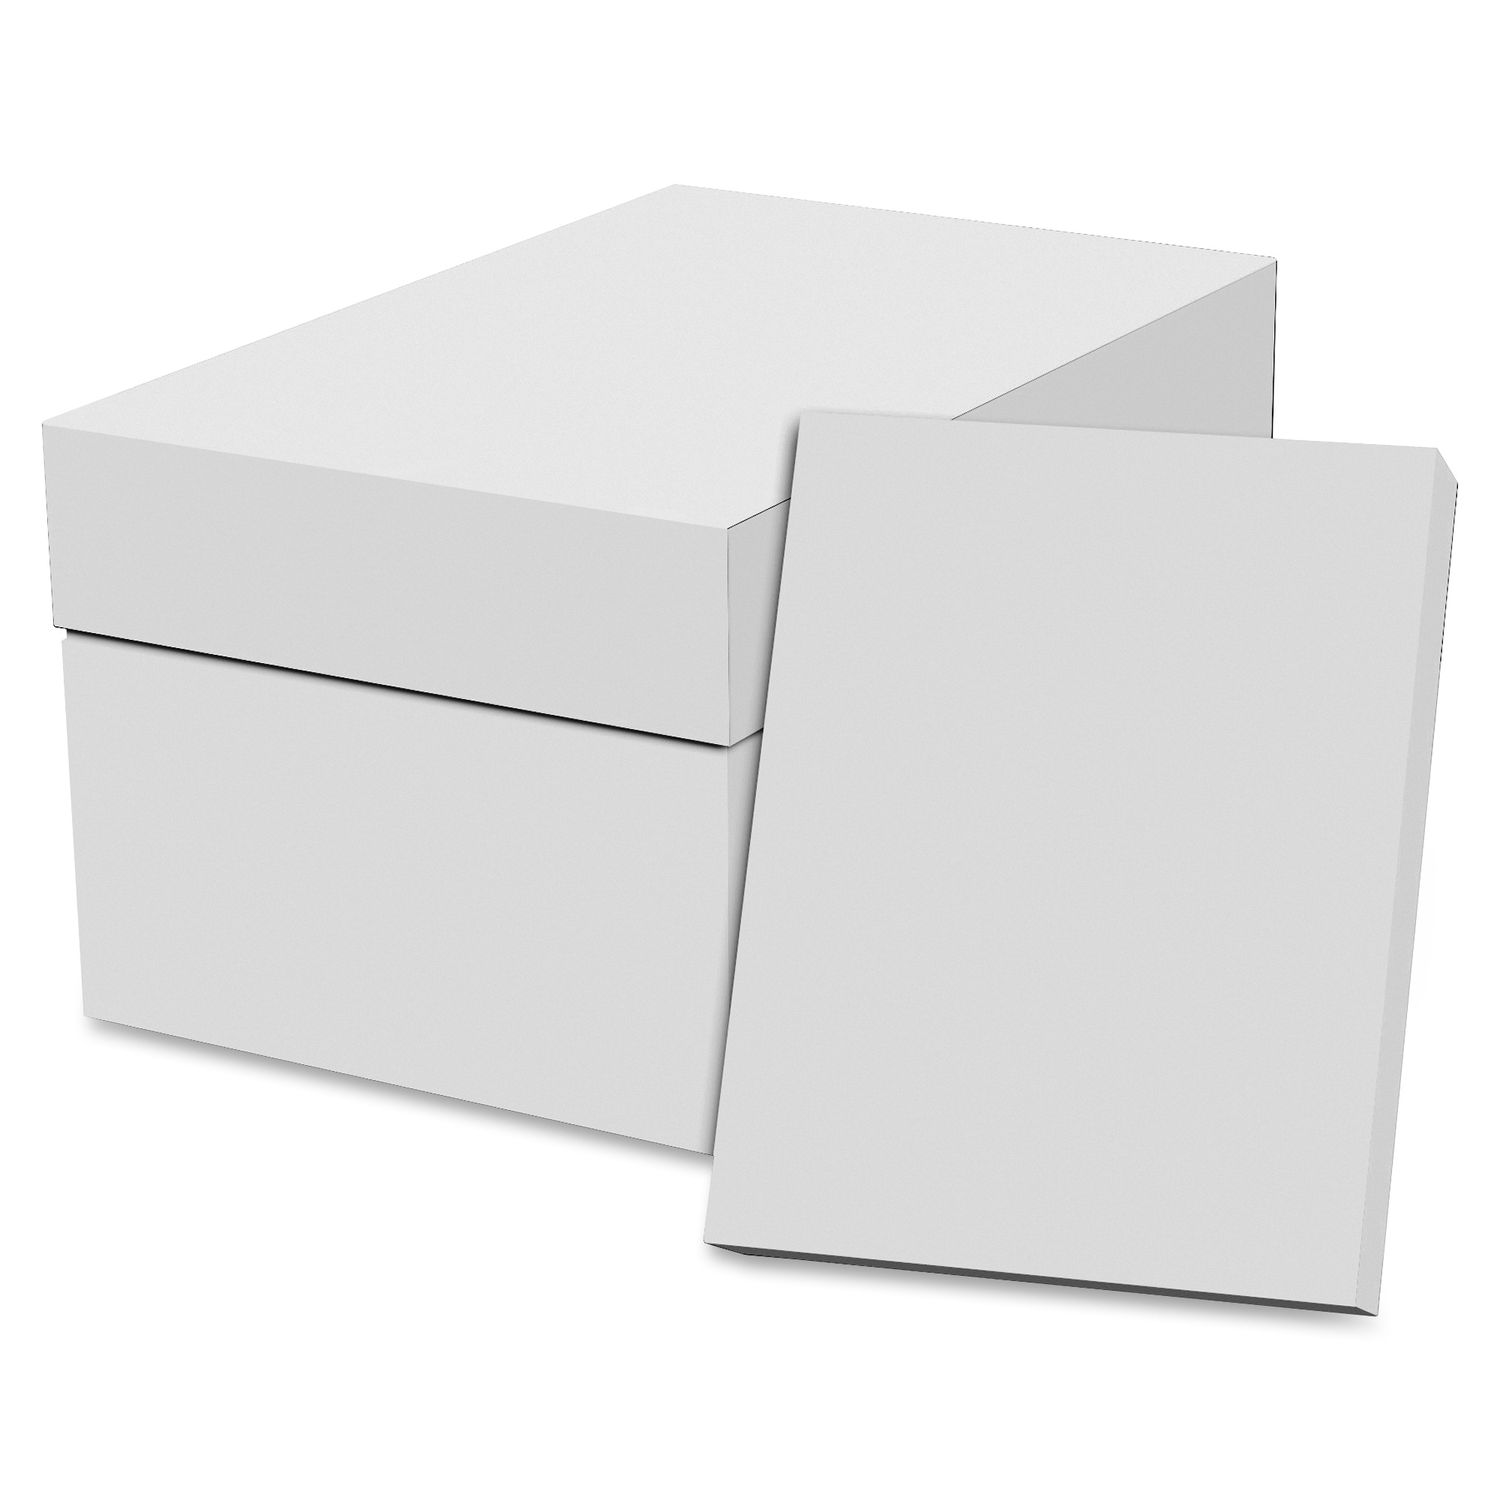 Economy Copy & Multipurpose Paper - White Letter, 8 1/2" x 11", 20 lb Basis Weight, 200000 / Pallet